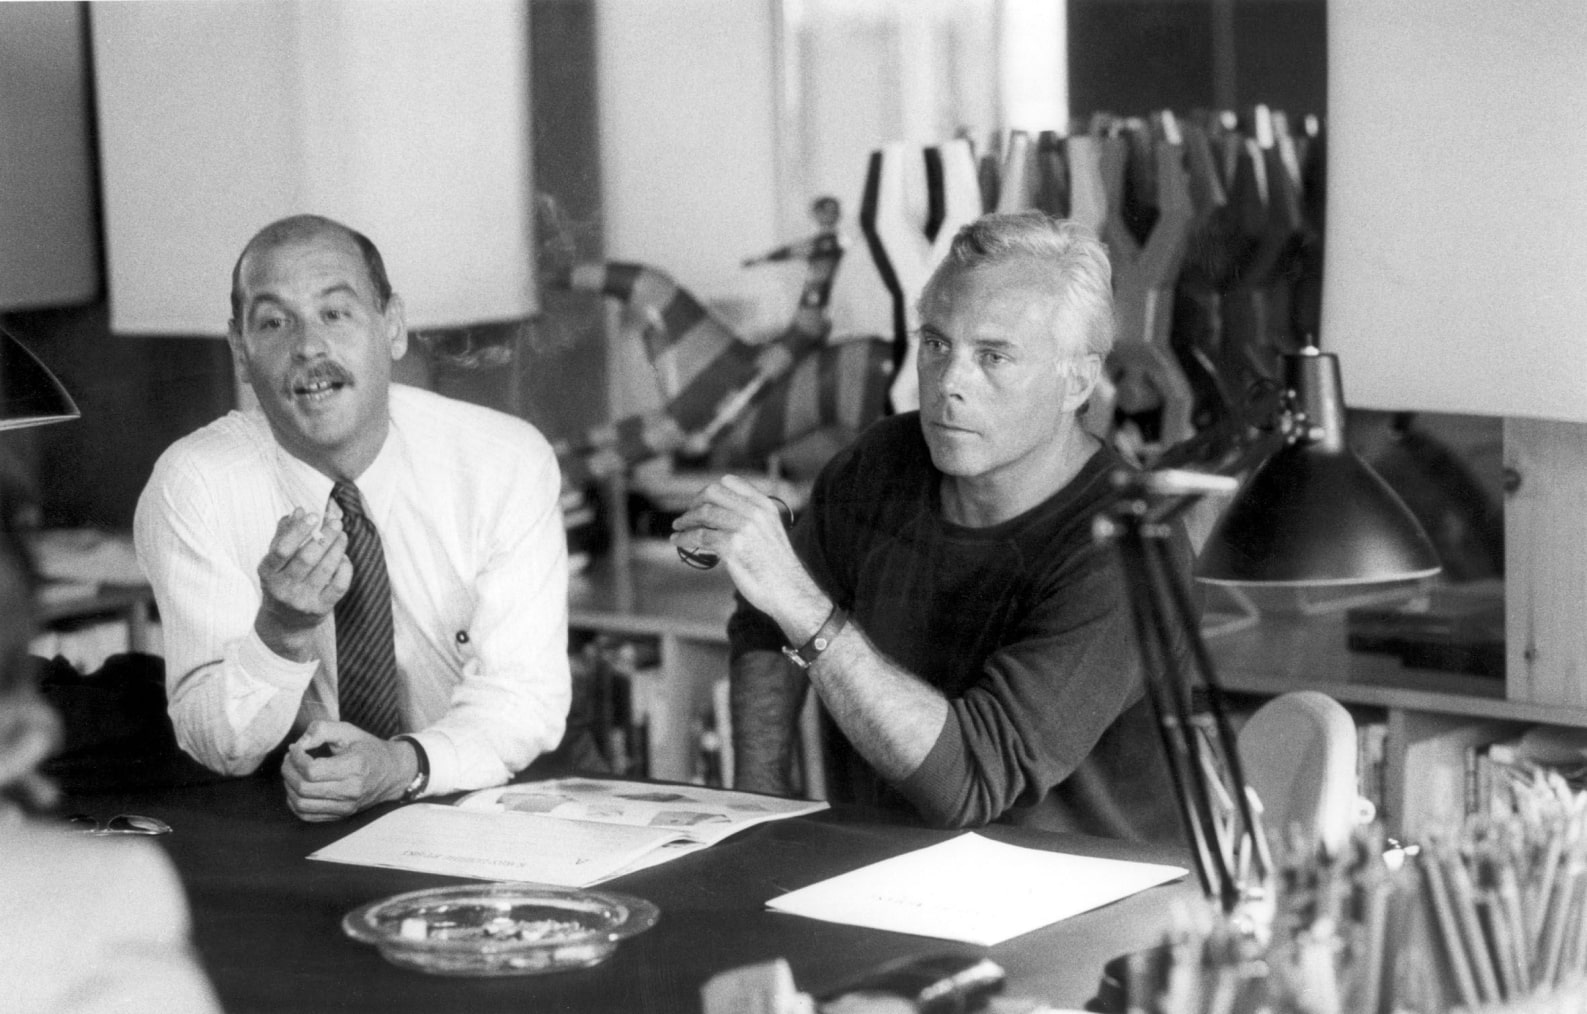 The History of the Armani Brand –